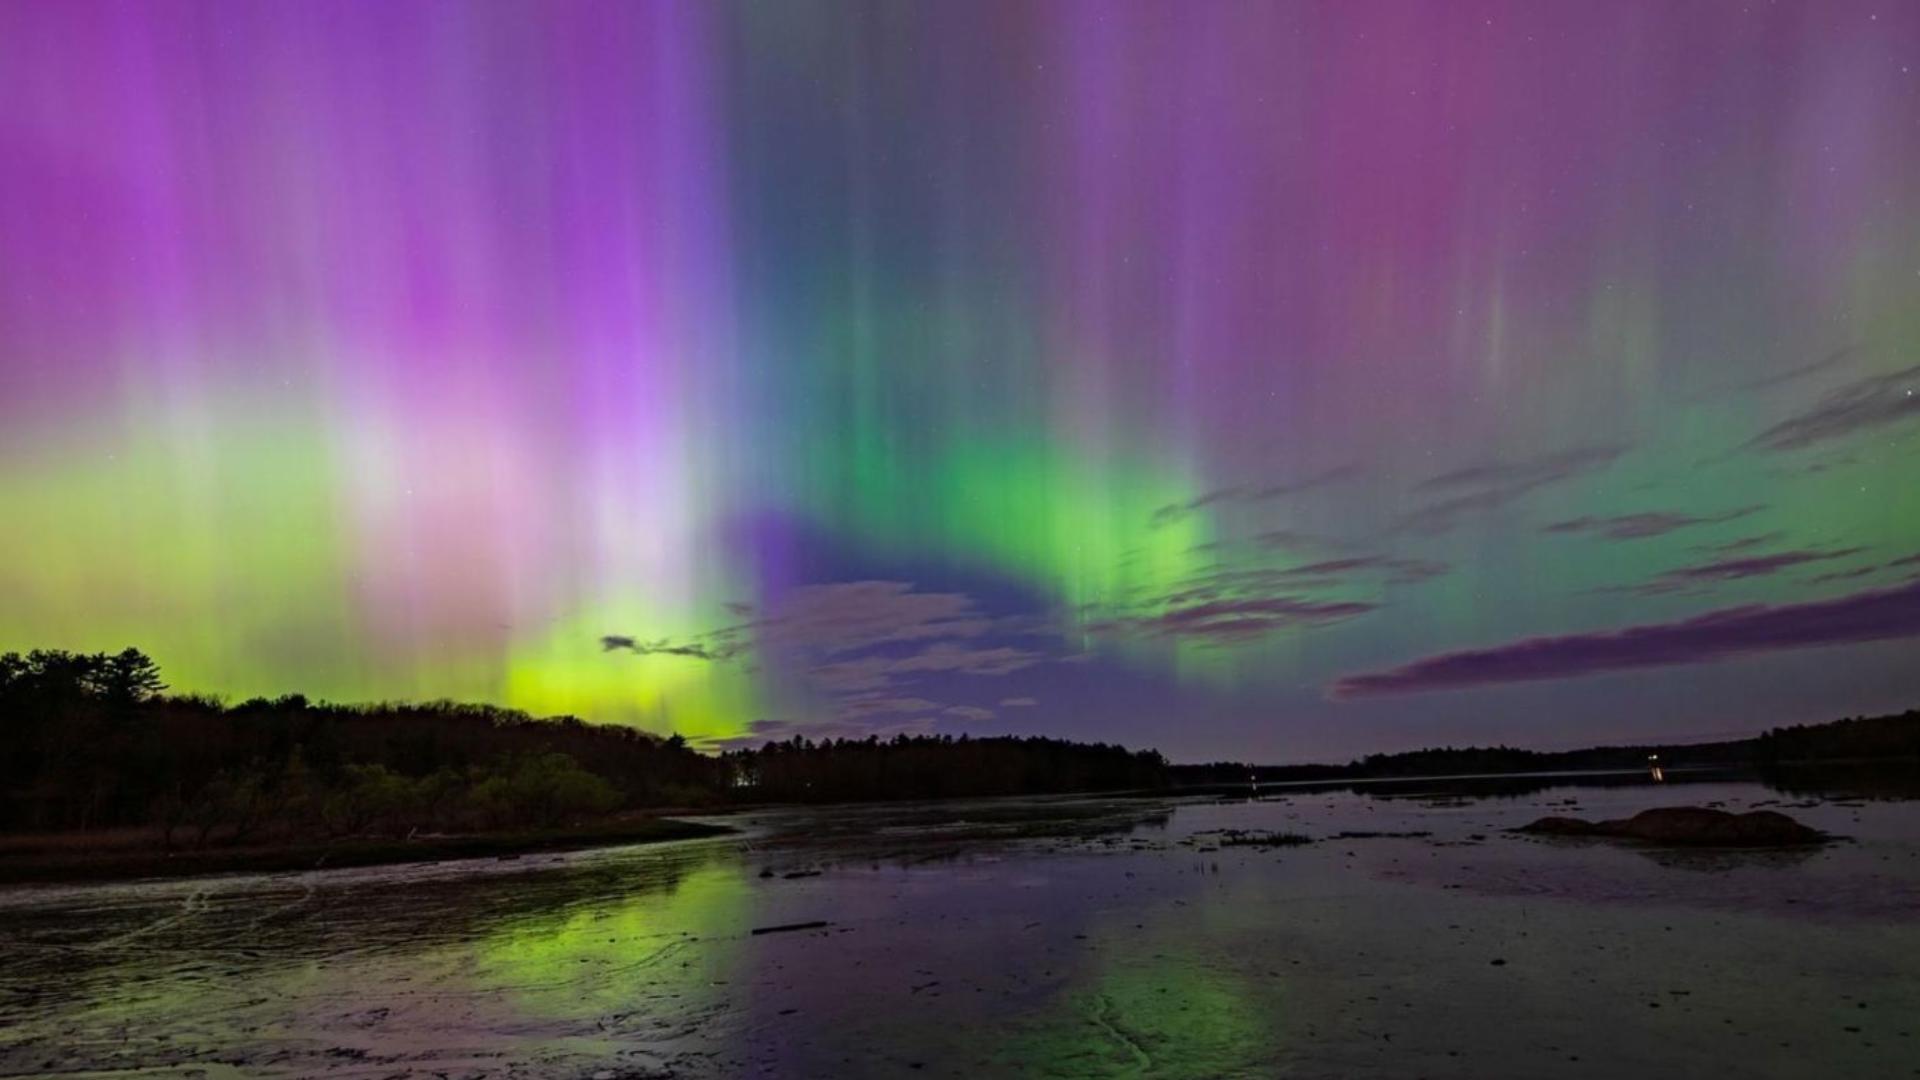 Let's talk about what aurora is and take a look as some of the pictures Mainers sent.